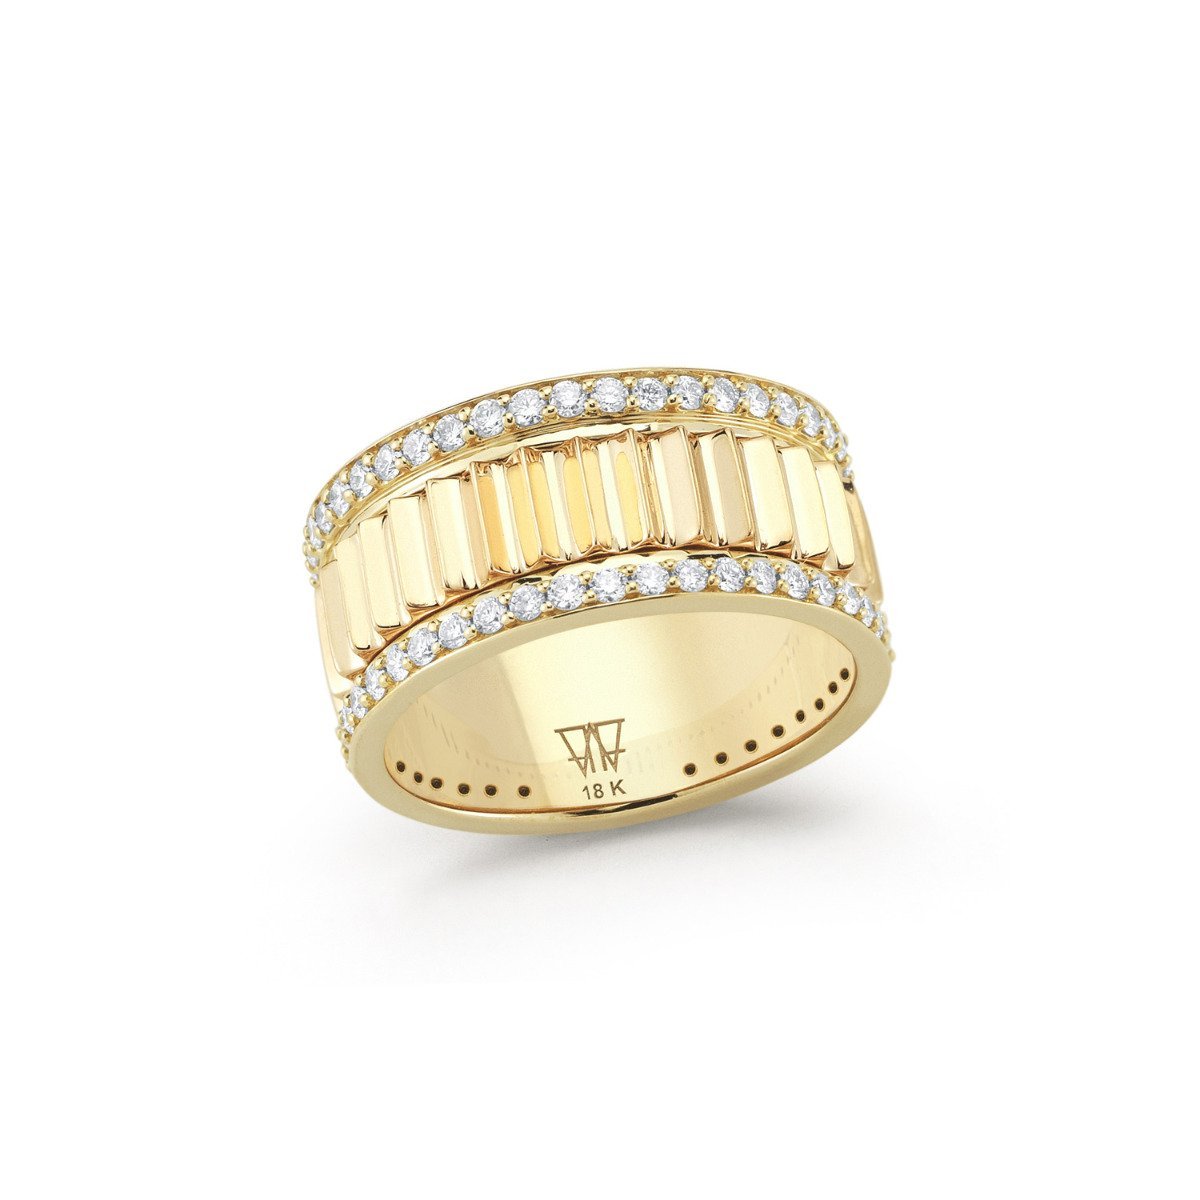 Walters Faith "Clive" 18k Yellow Gold Fluted Ring With Diamond Edges (6.5)